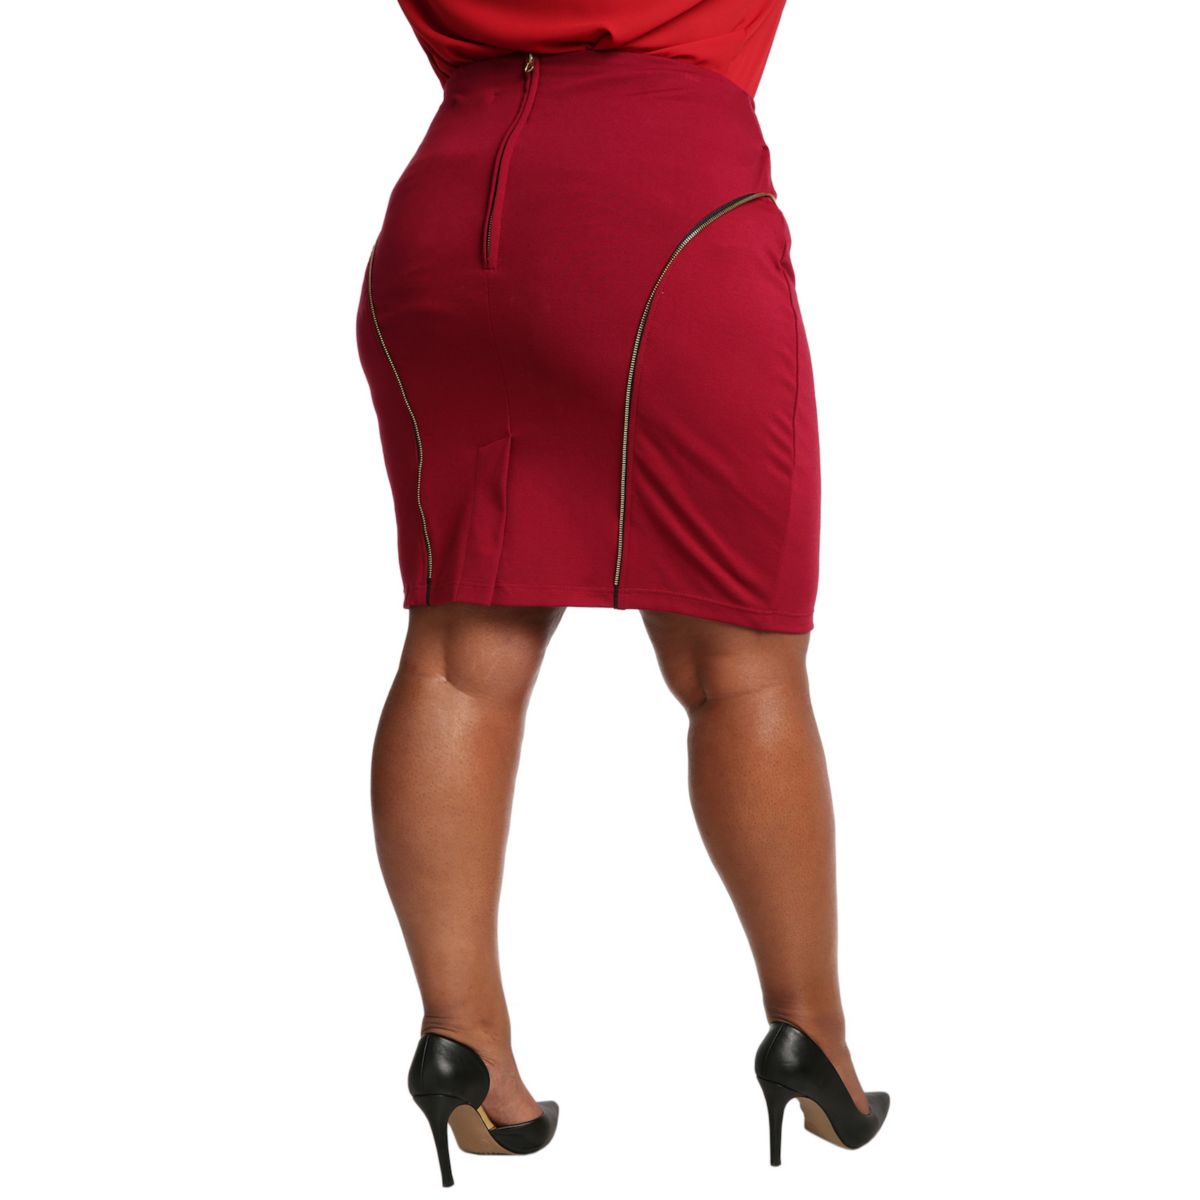 Plus Size Tiffy Pencil Skirt With Zipper Trim On Princess Lines Poetic Justice